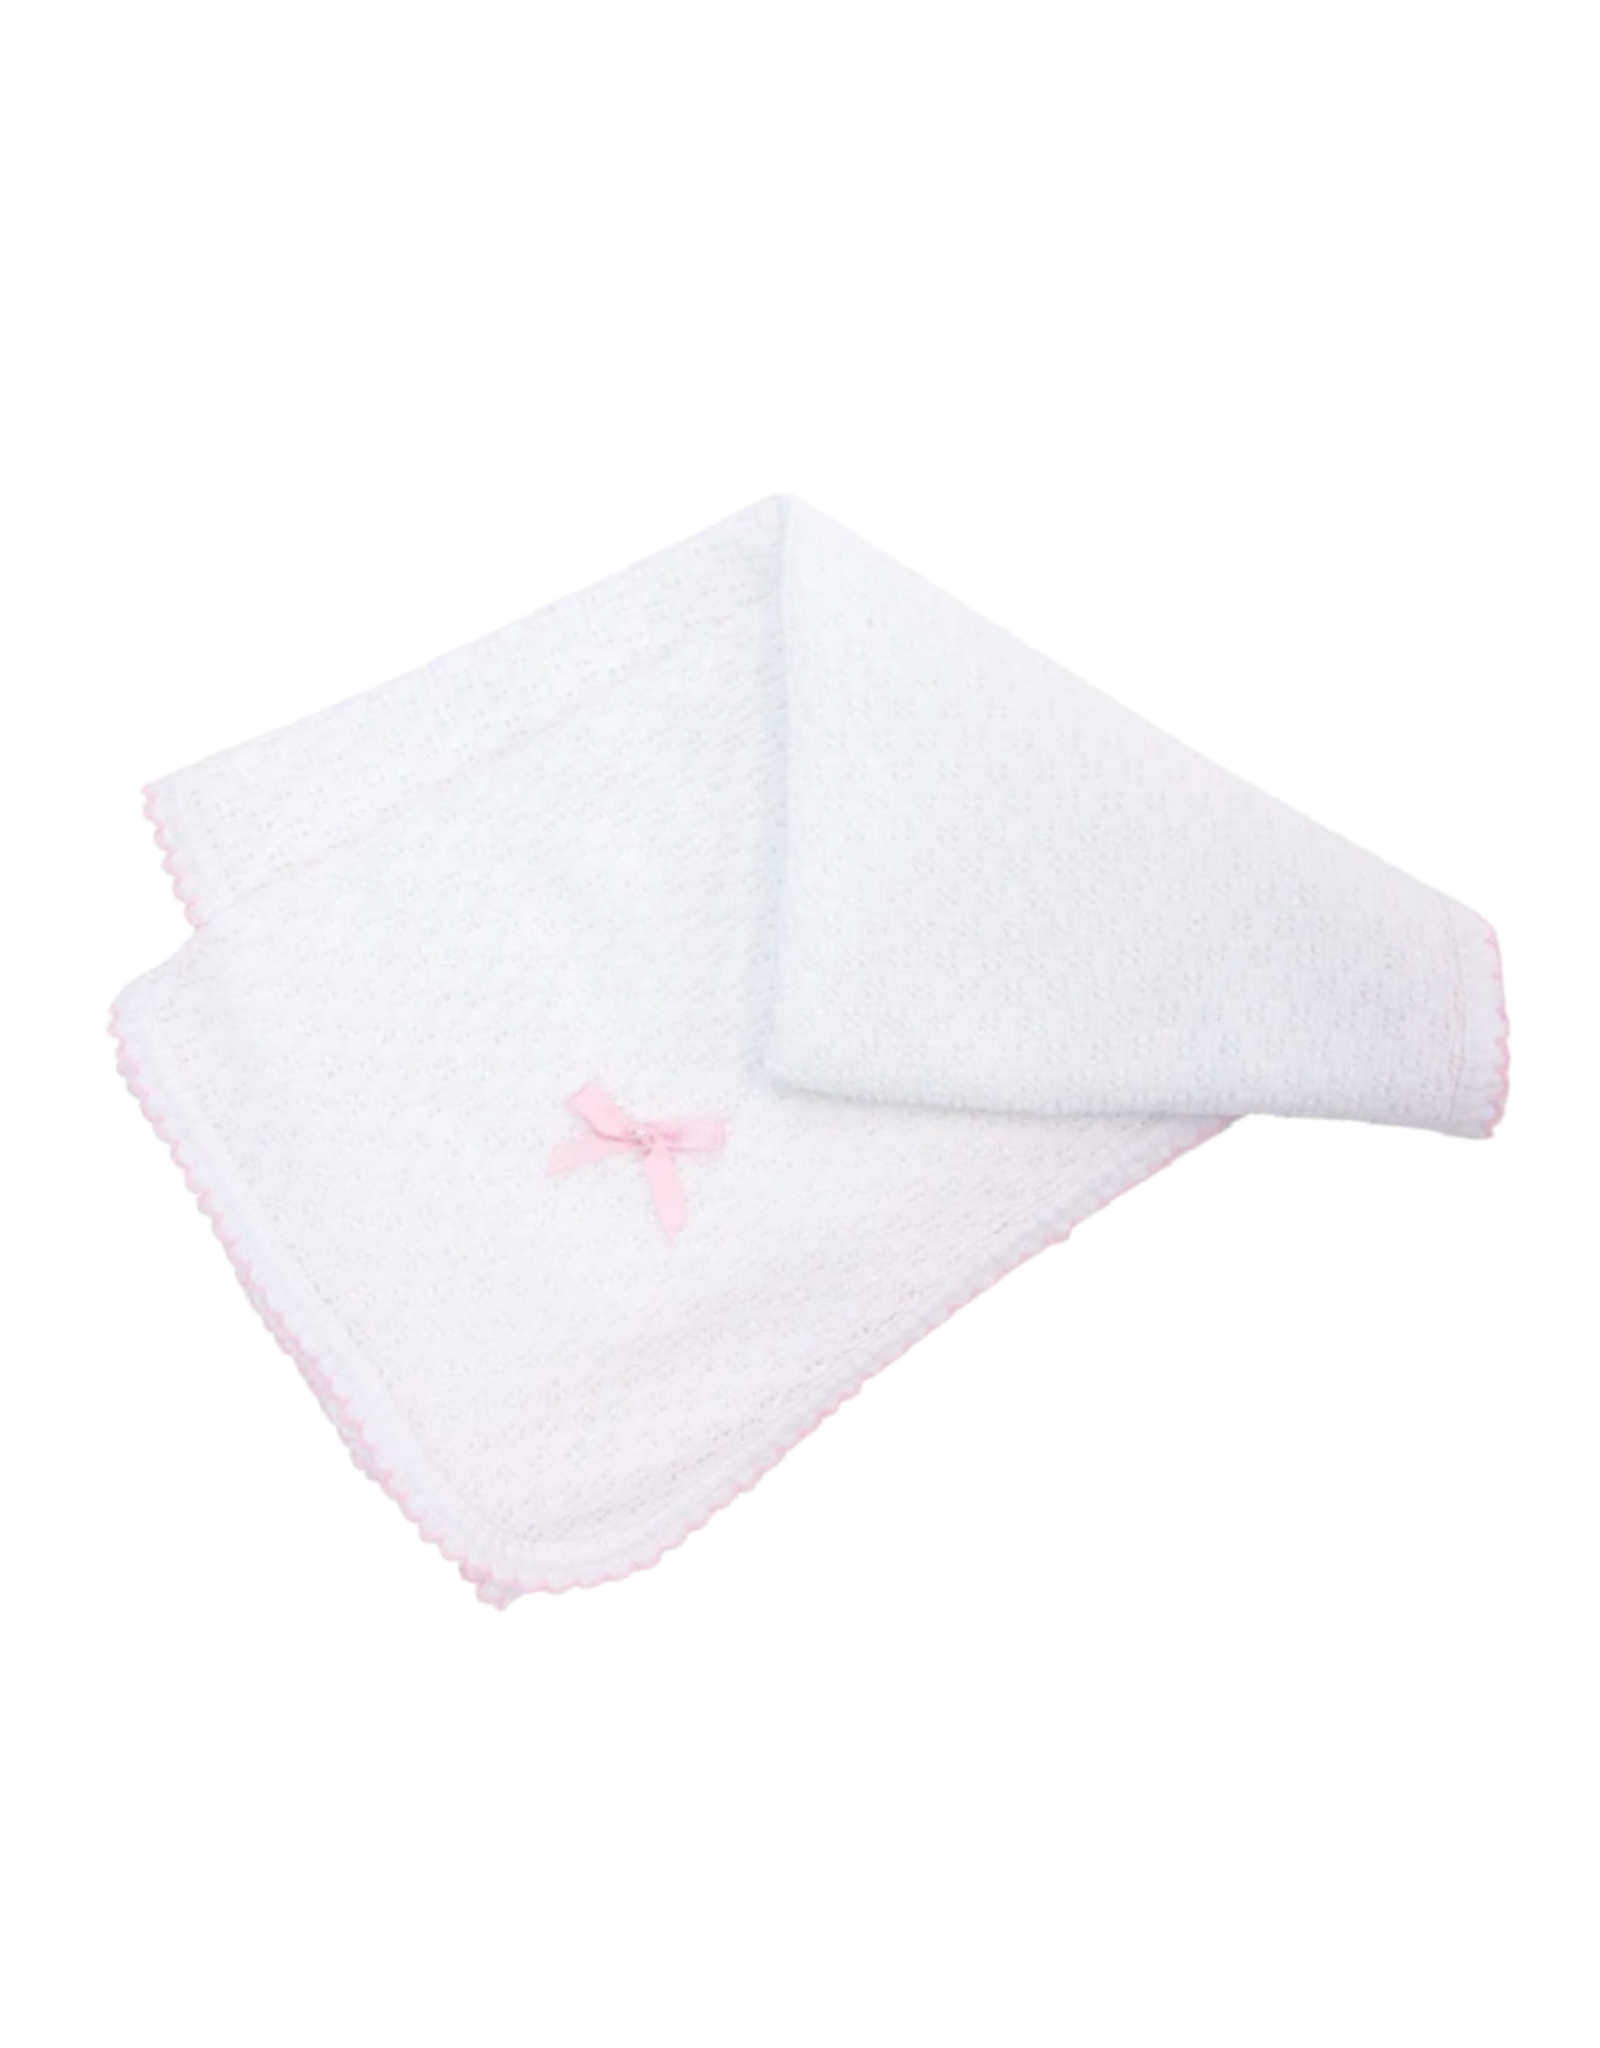 Paty Paty White Blanket With Trim Pink